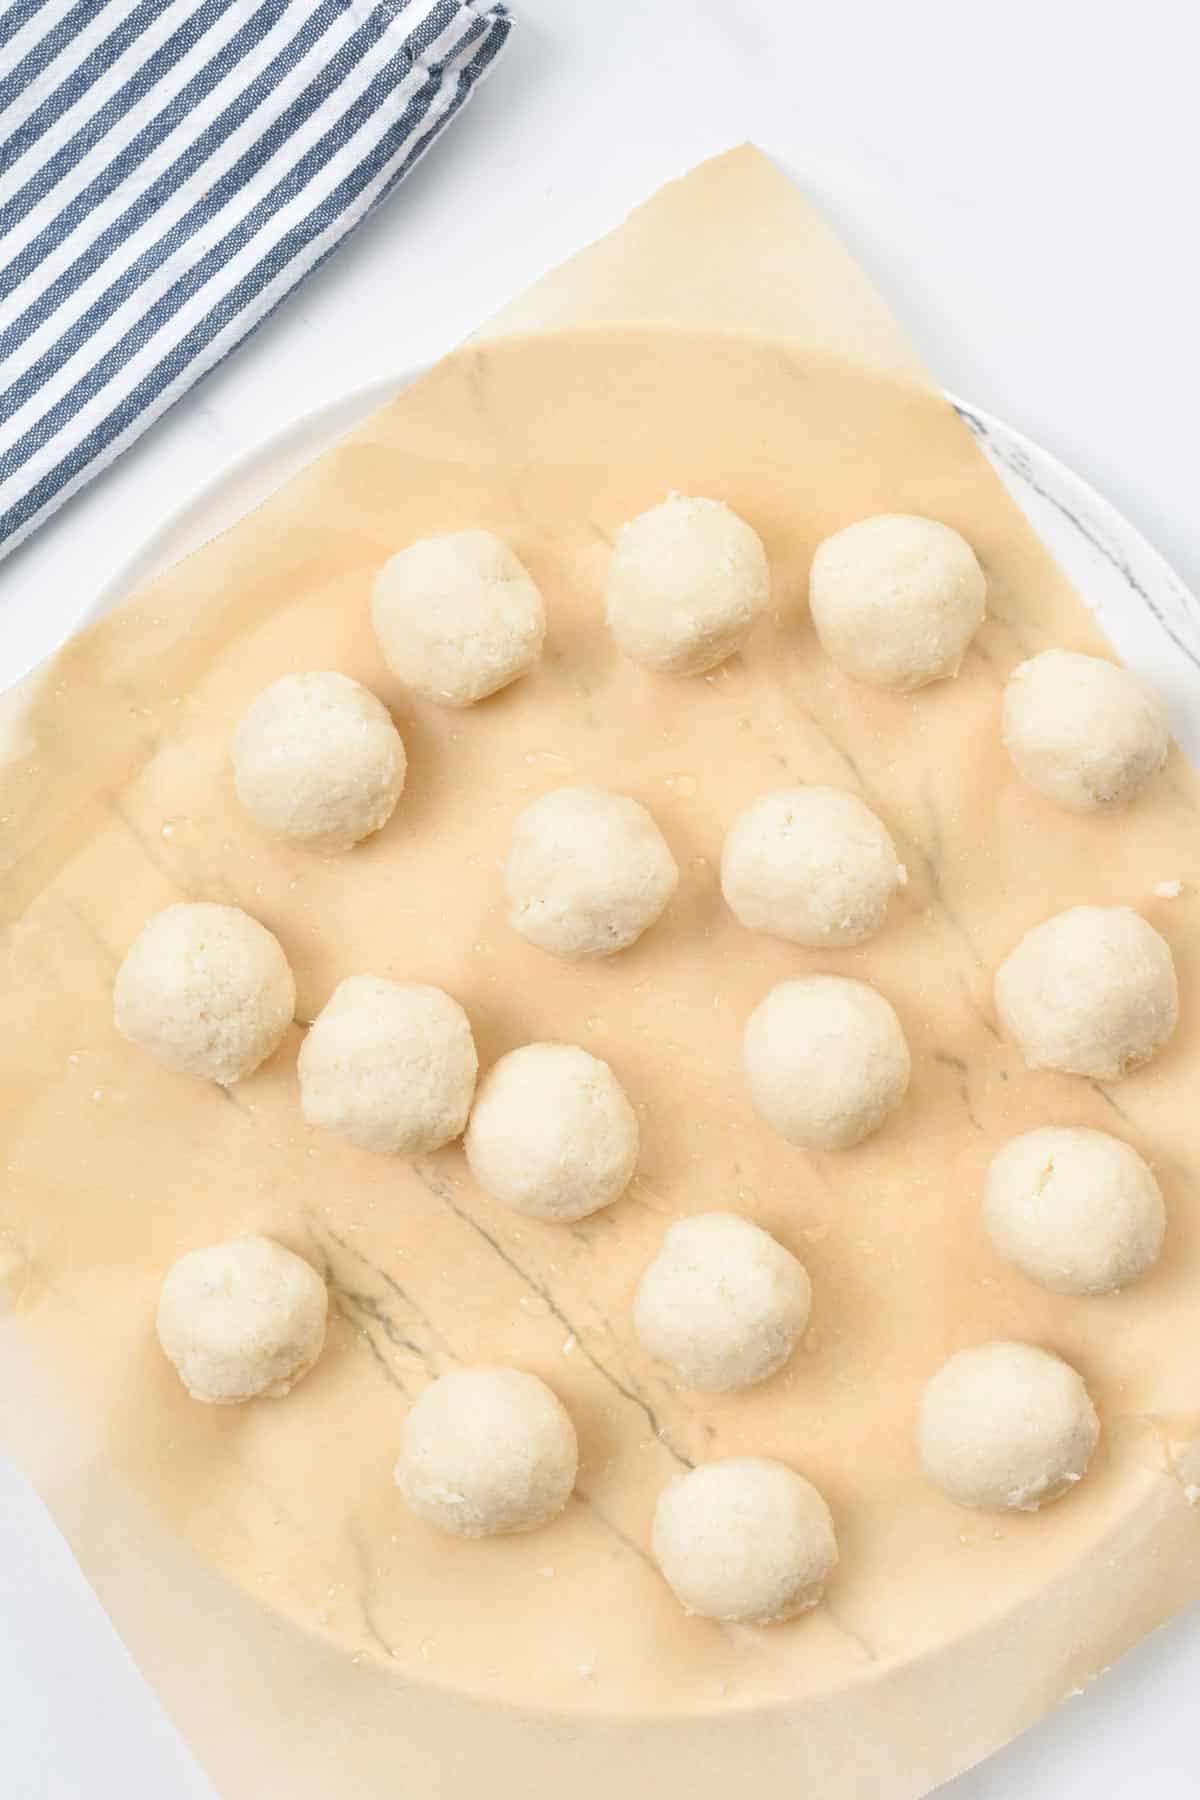 A plate with white coconut balls on parchment paper.